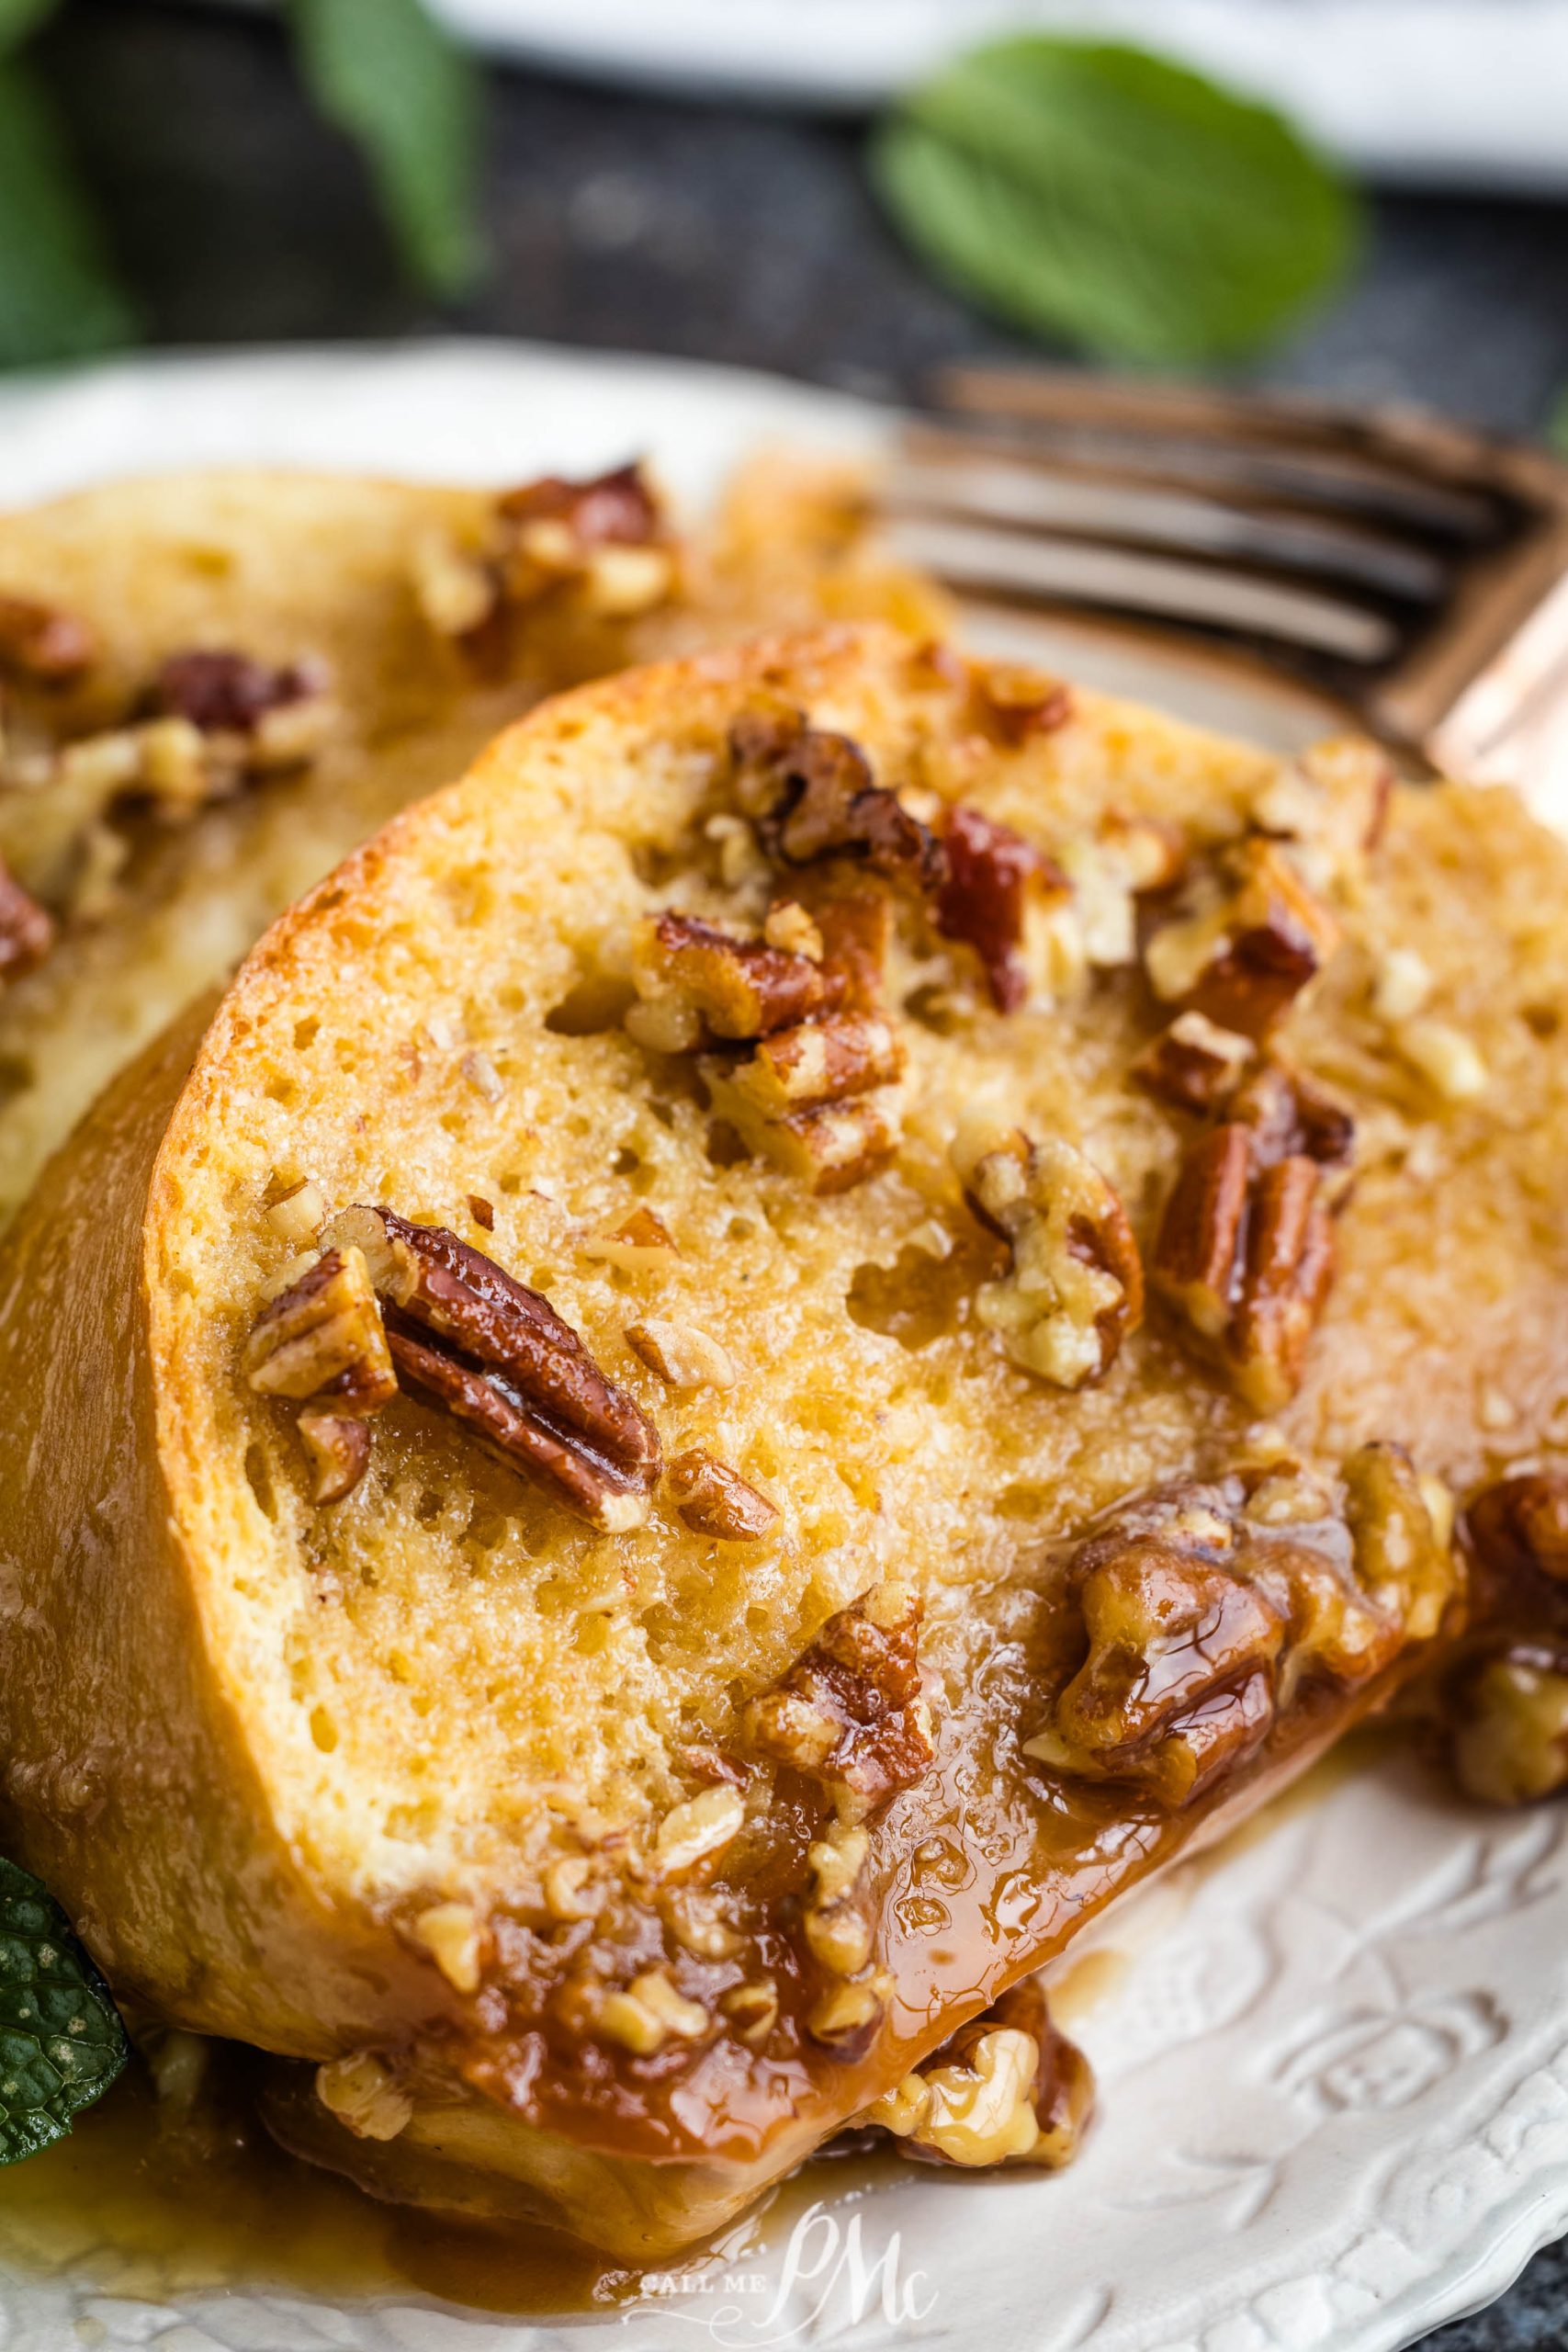 A slice of bread with caramel sauce and pecans on a plate.